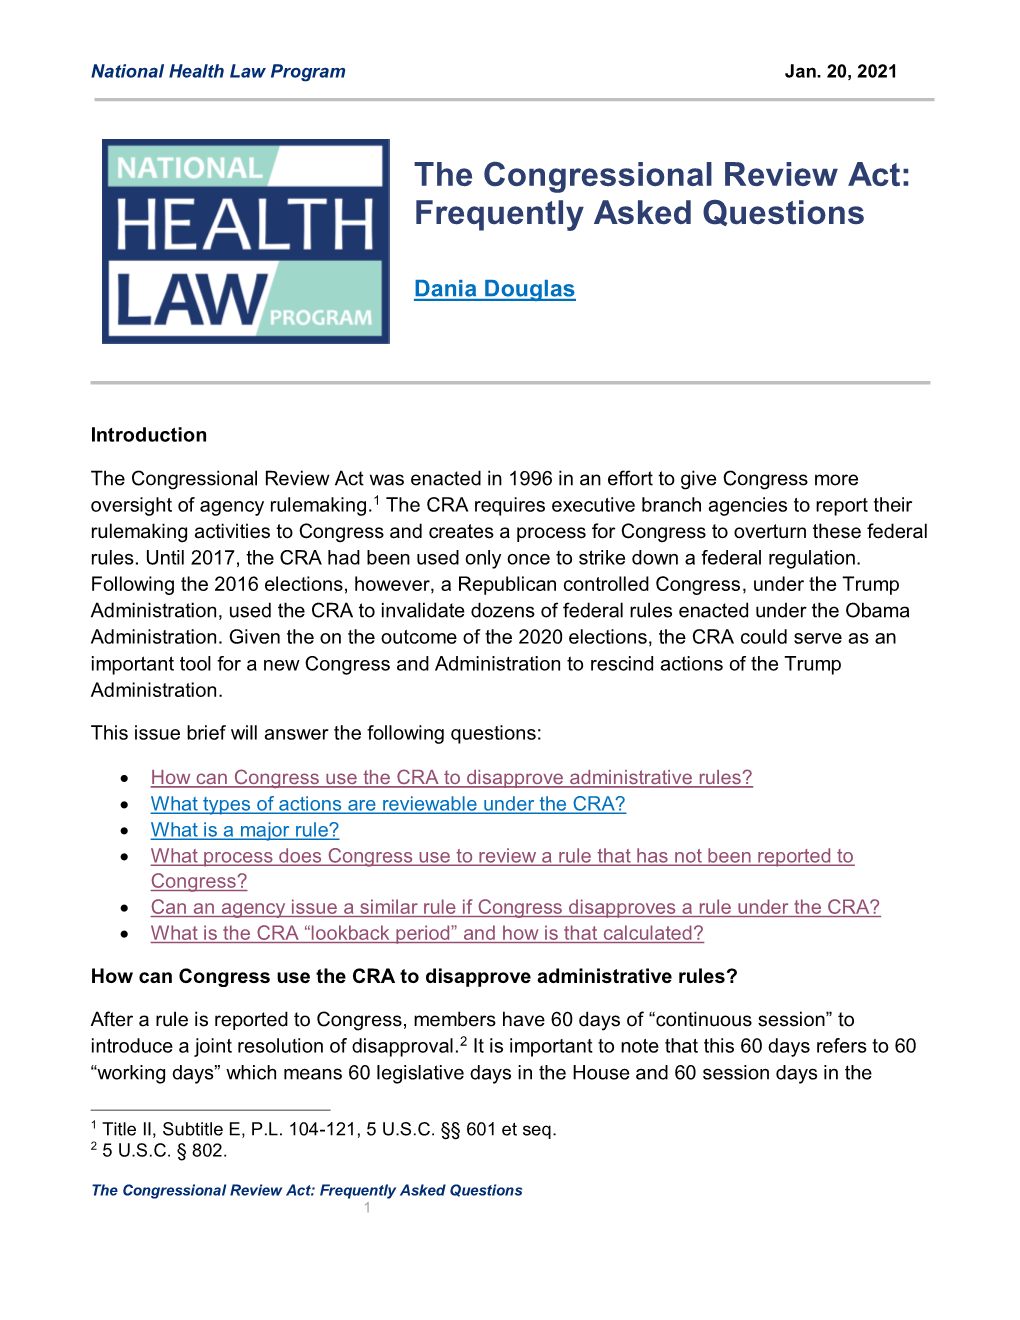 The Congressional Review Act: Frequently Asked Questions